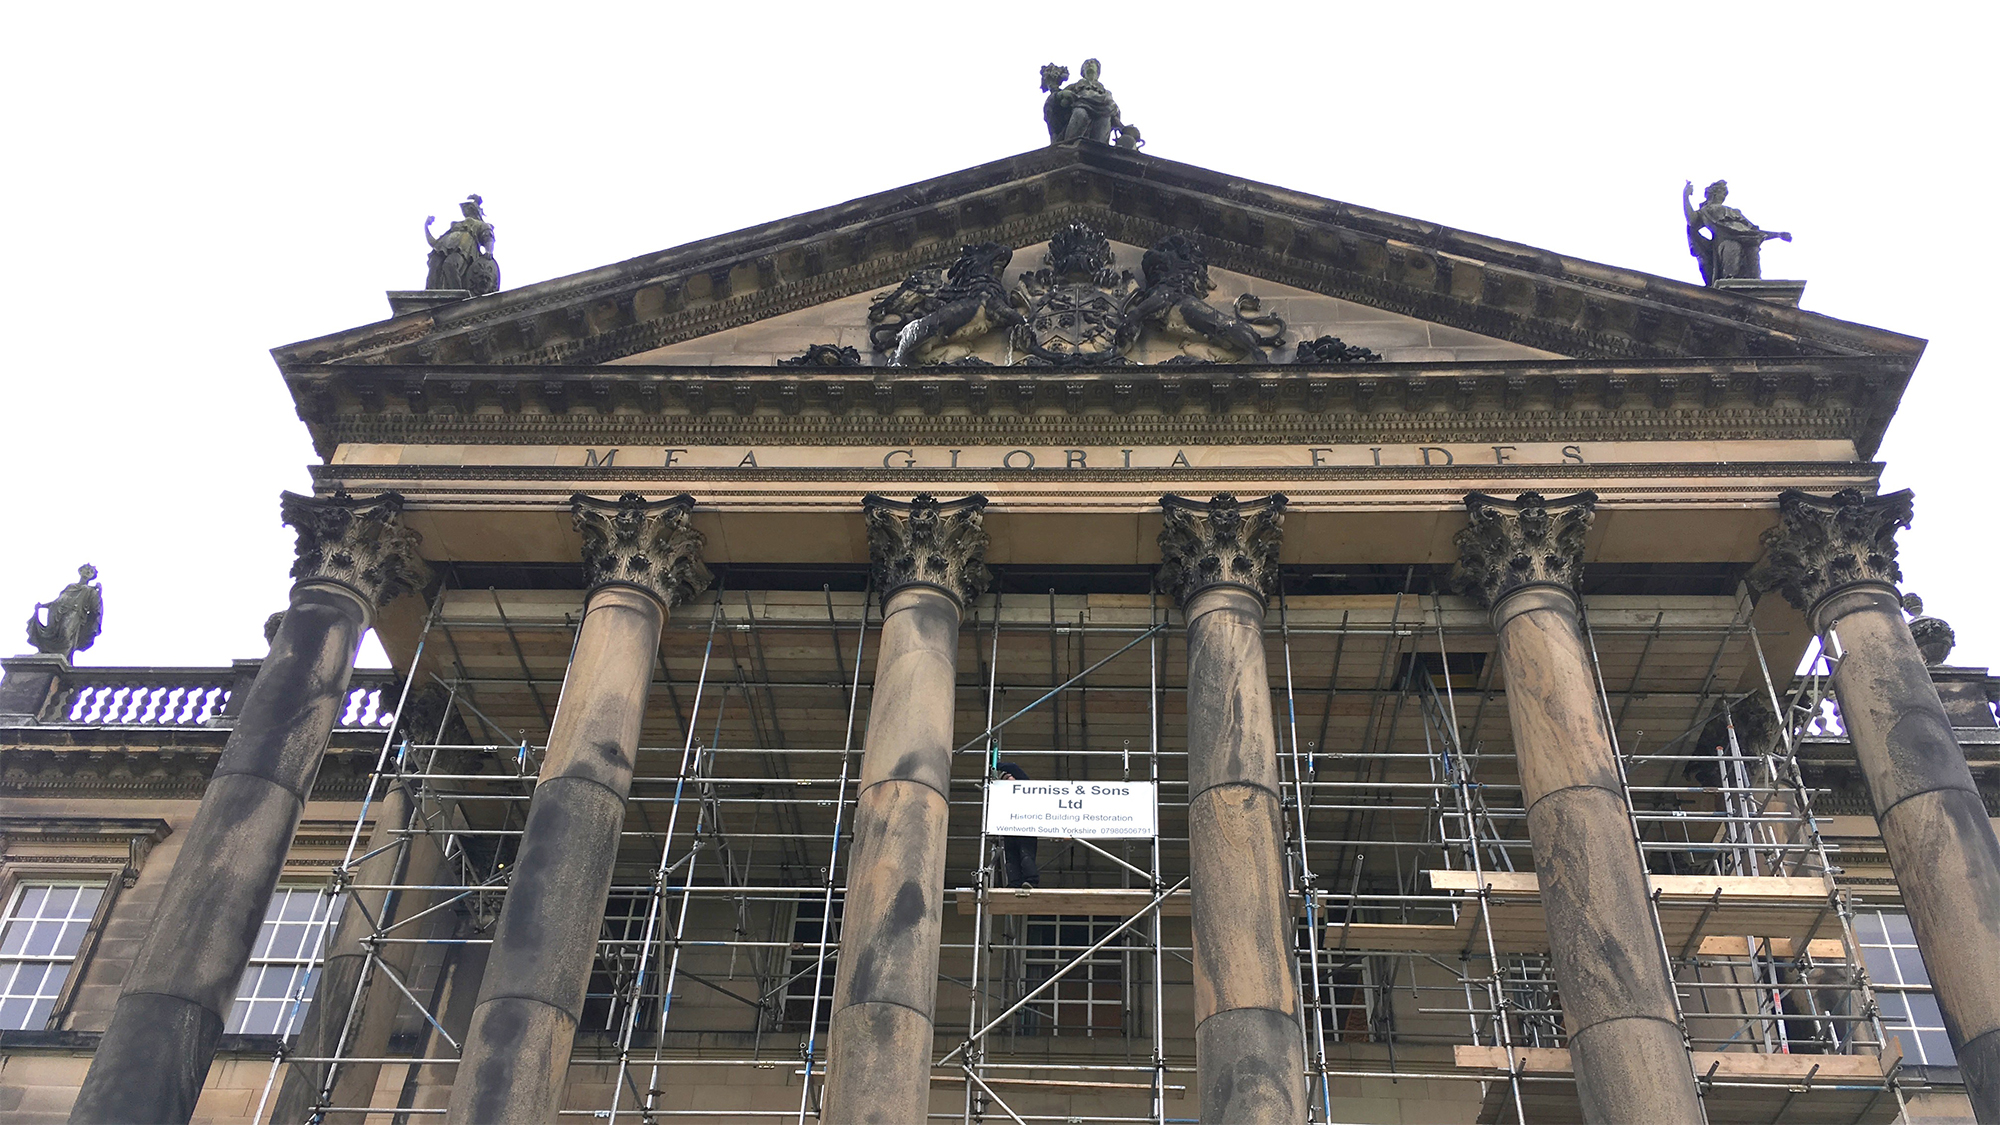 Wentworth Woodhouse Portico ceiling with inspection scaffolding